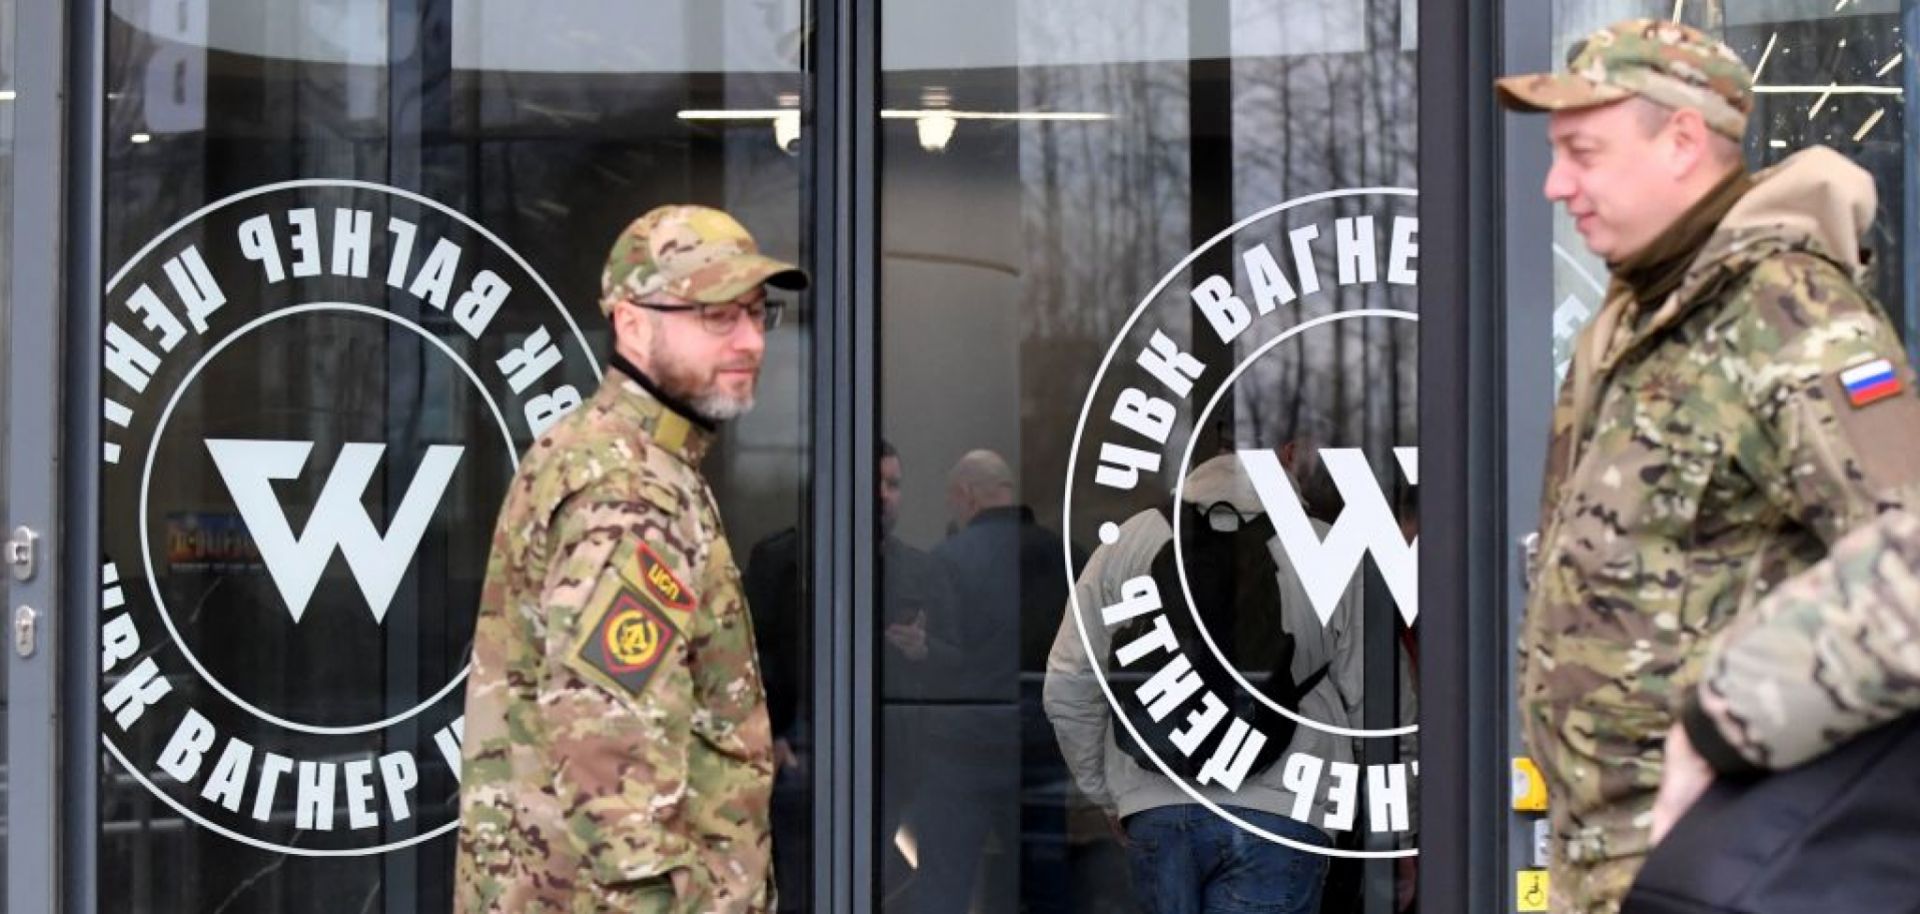 Visitors wearing military camouflage stand at the entrance of the ''PMC Wagner Center,'' which is associated with the founder of the Wagner private military group (PMC), Yevgeny Prigozhin, in Saint Petersburg, Russia, on Nov. 4, 2022.